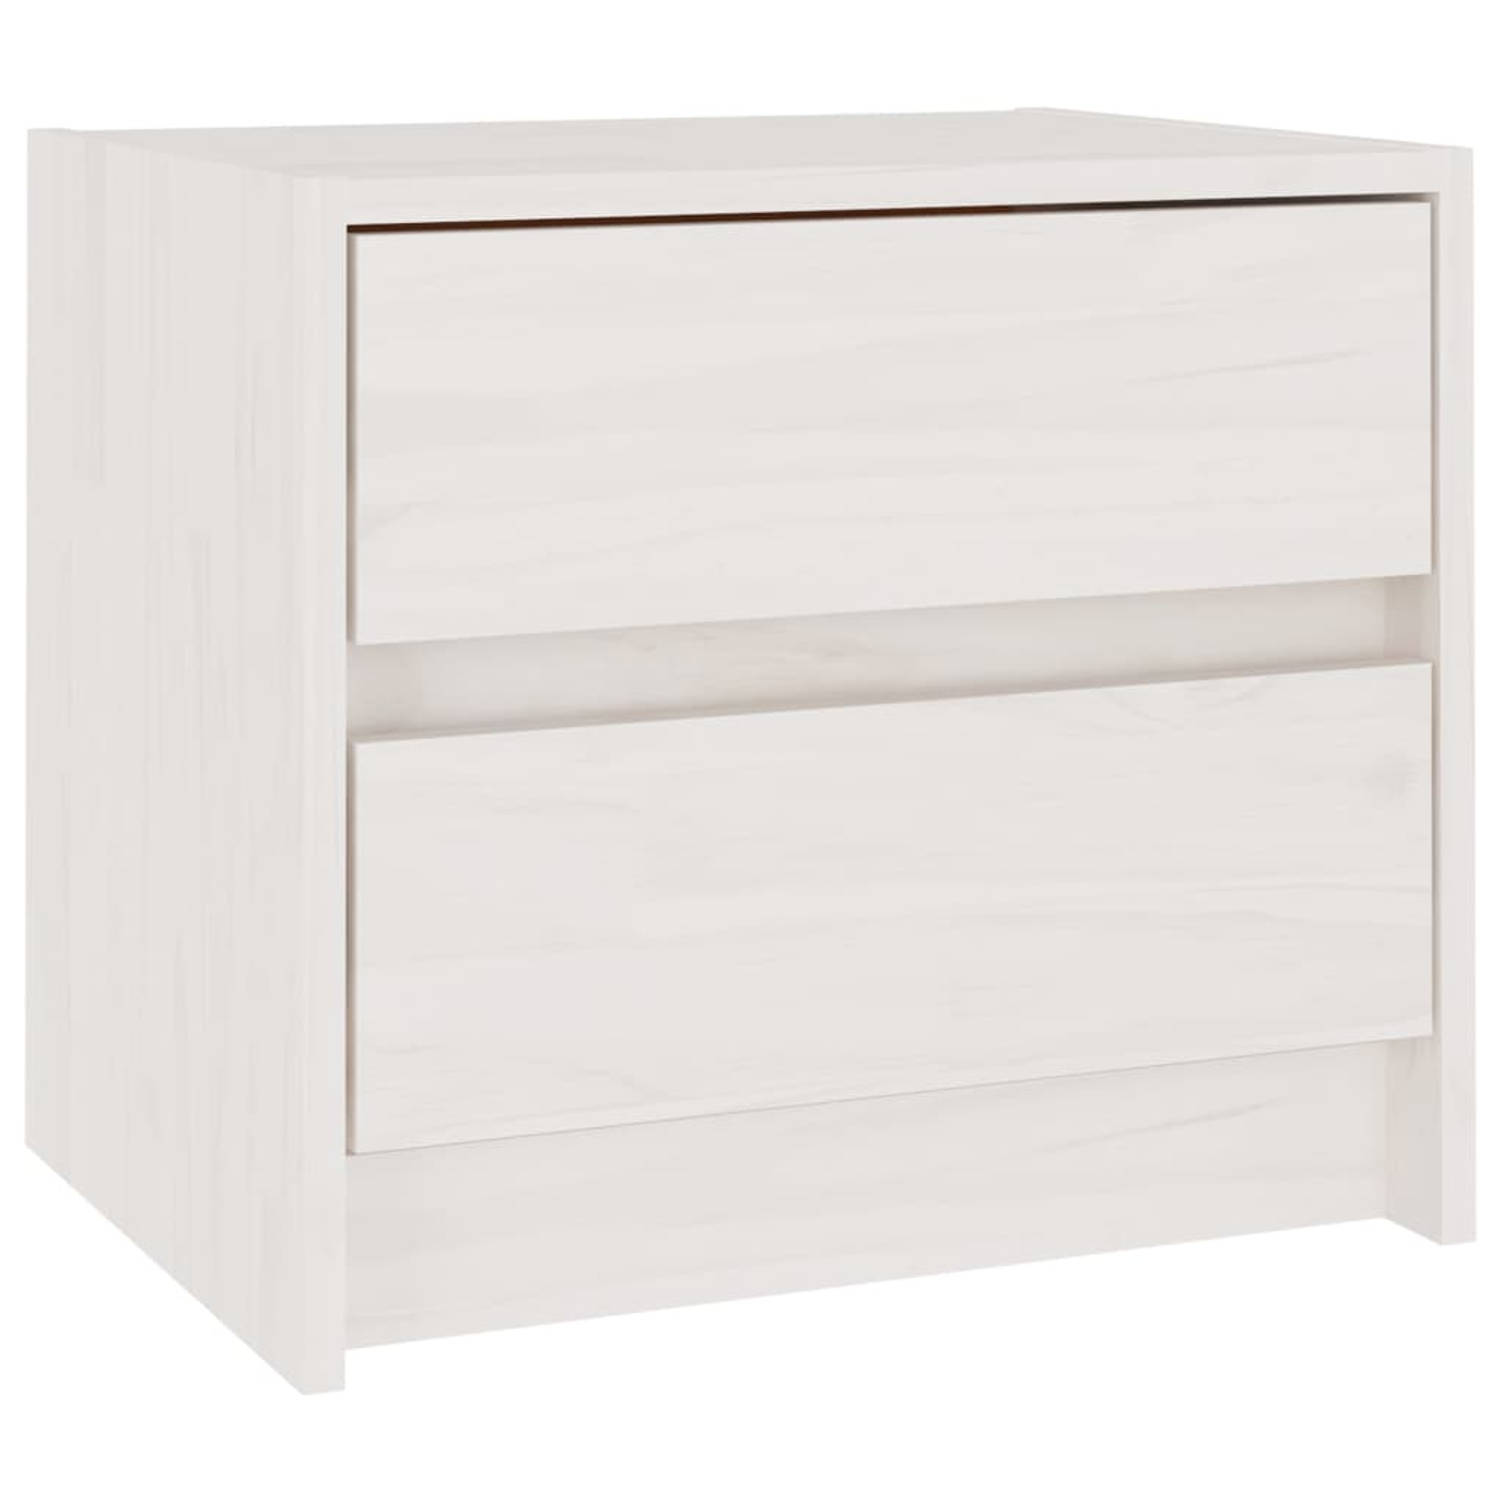 The Living Store Nachtkastje Grenenhout - Wit - 40 x 30.5 x 35.5 cm - 2 lades